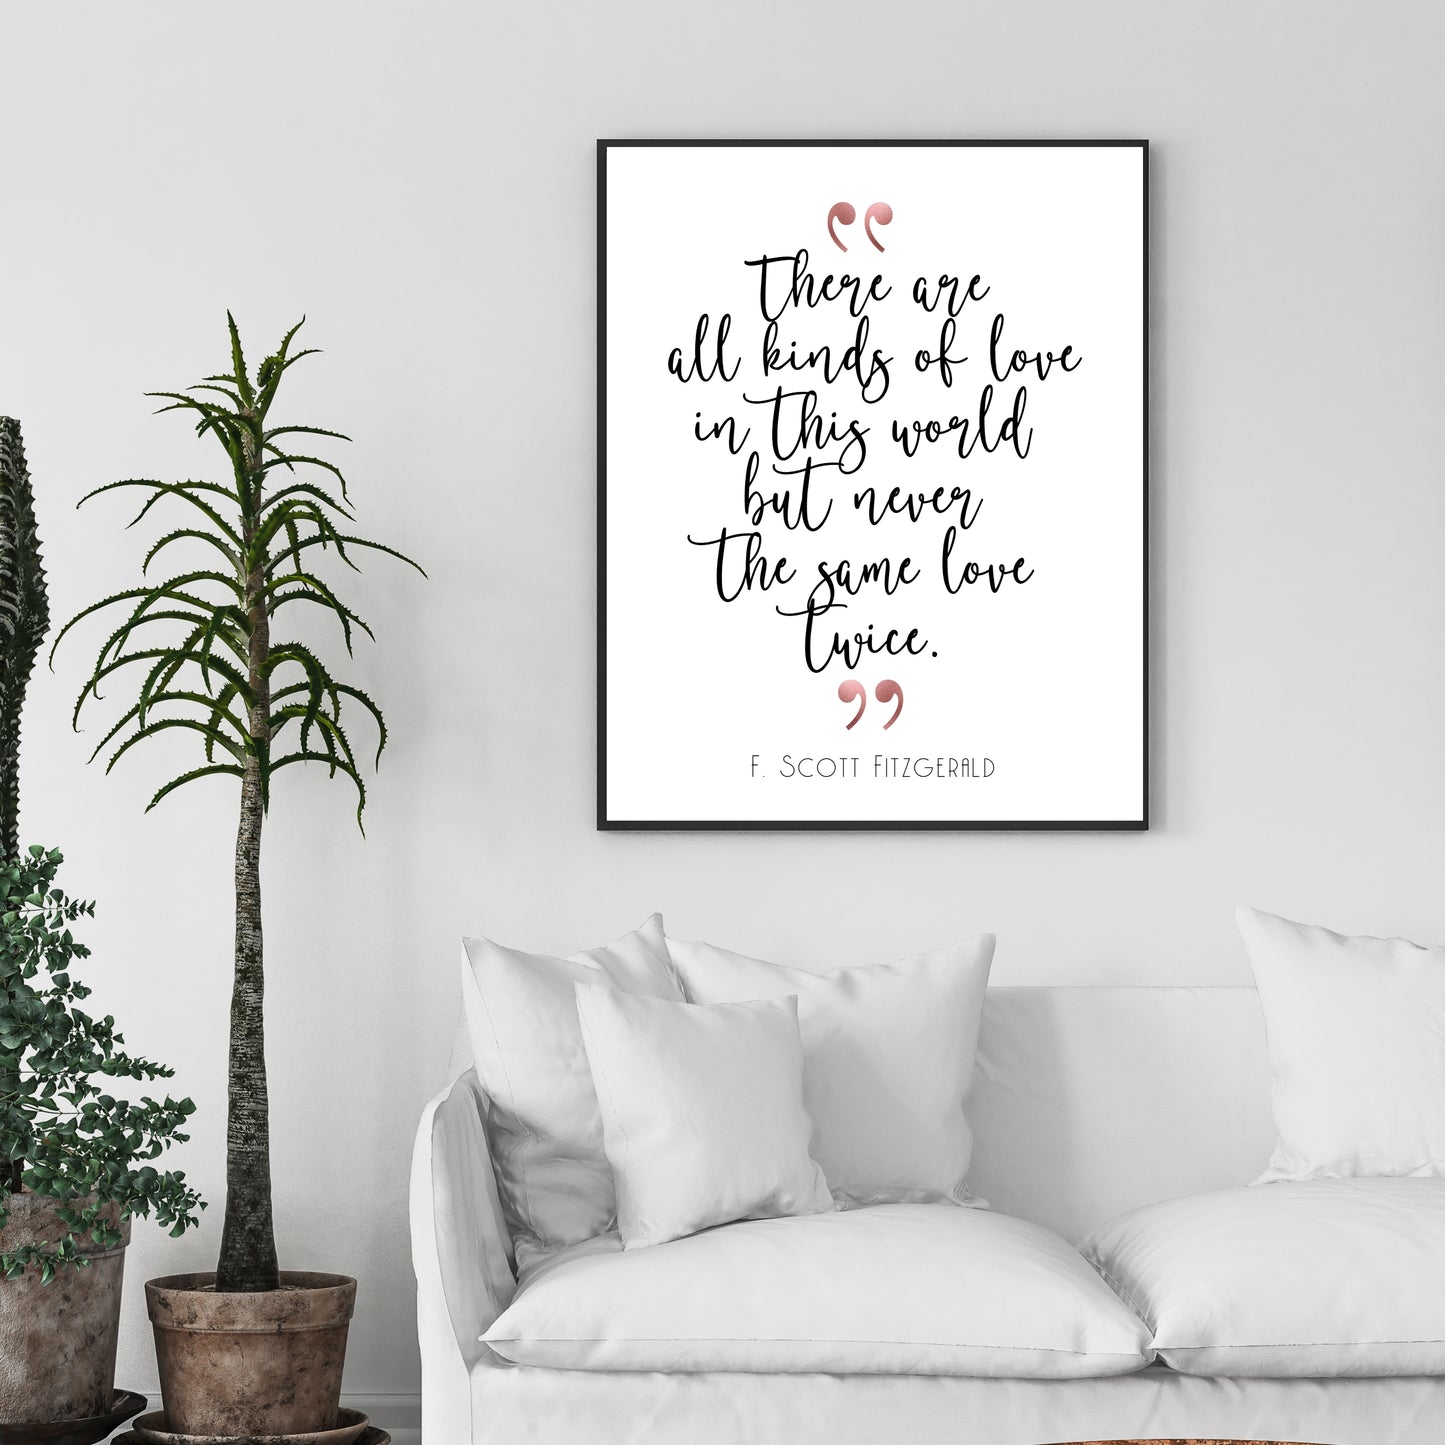 "There Are All Kinds Of Love In This World But Never The Same Love Twice" Quote By F. Scott Fitzgerald With Rose Gold Accents, Printable Art